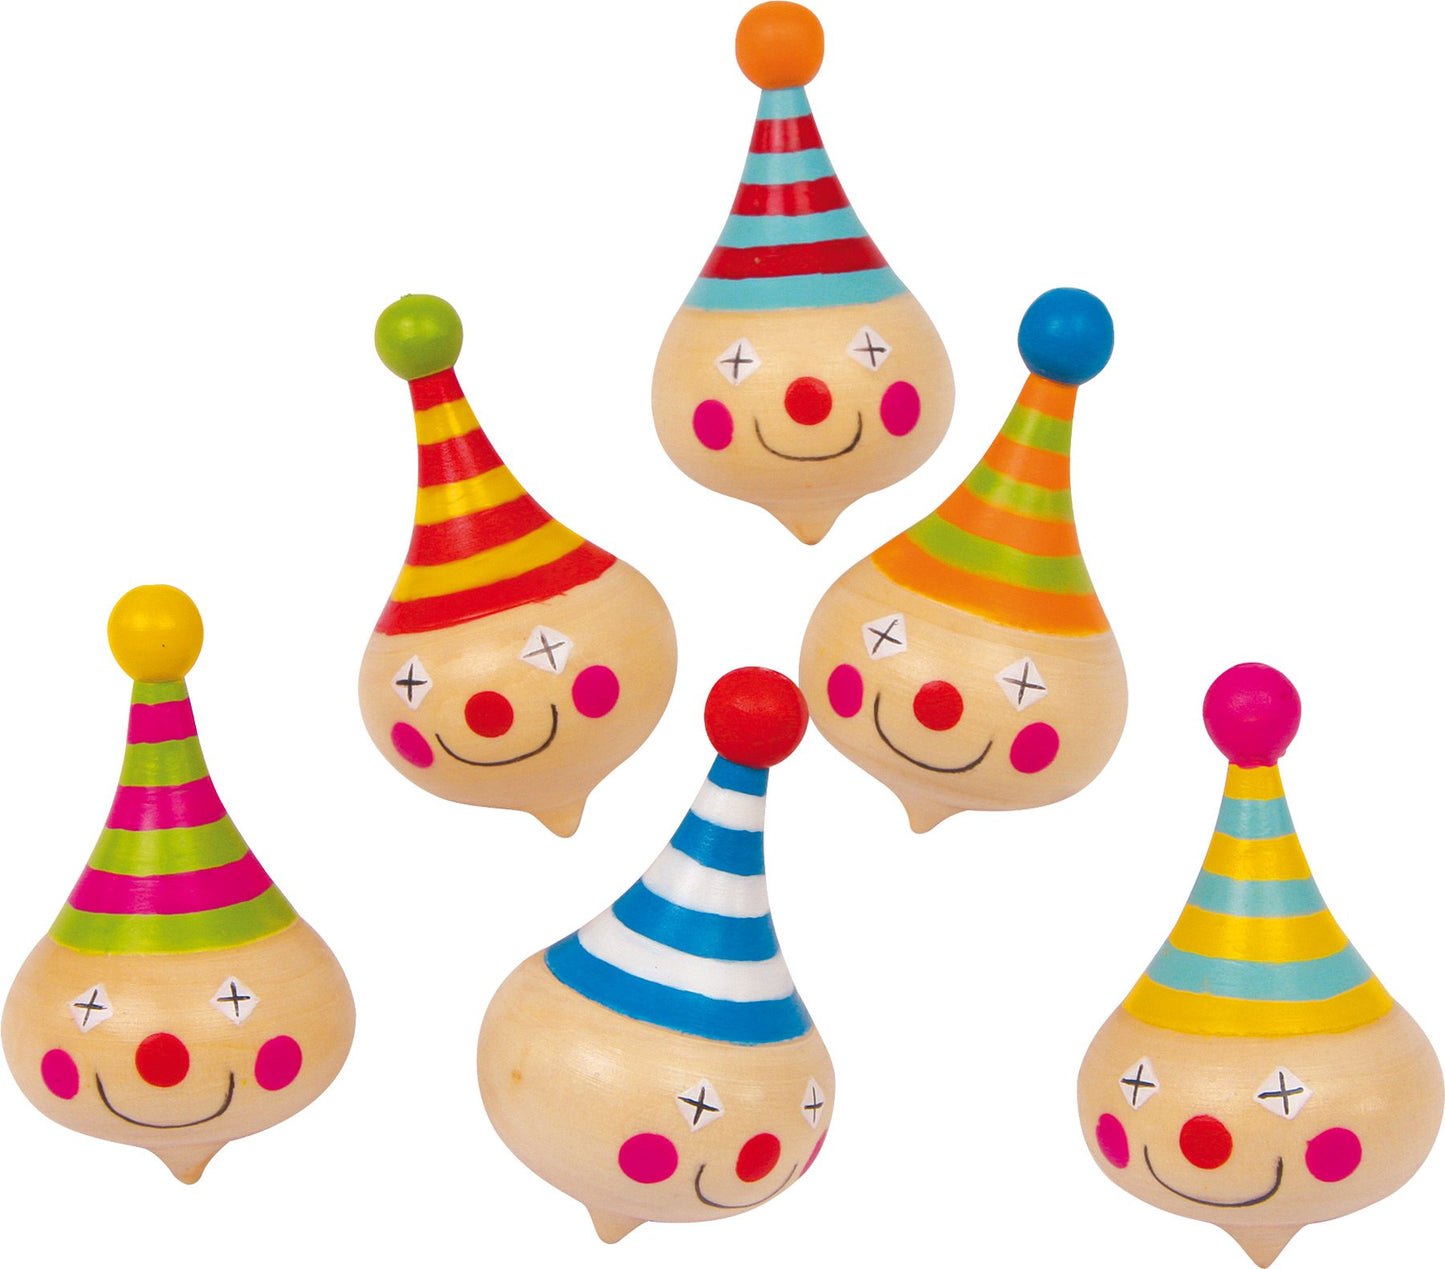 small foot Set of 6 Clown Spinning Tops, Solid Wood with Colourful Clown Face, Motor Skills Toy, 6138 Toys, 5 x 3.5 x 3.5 cm